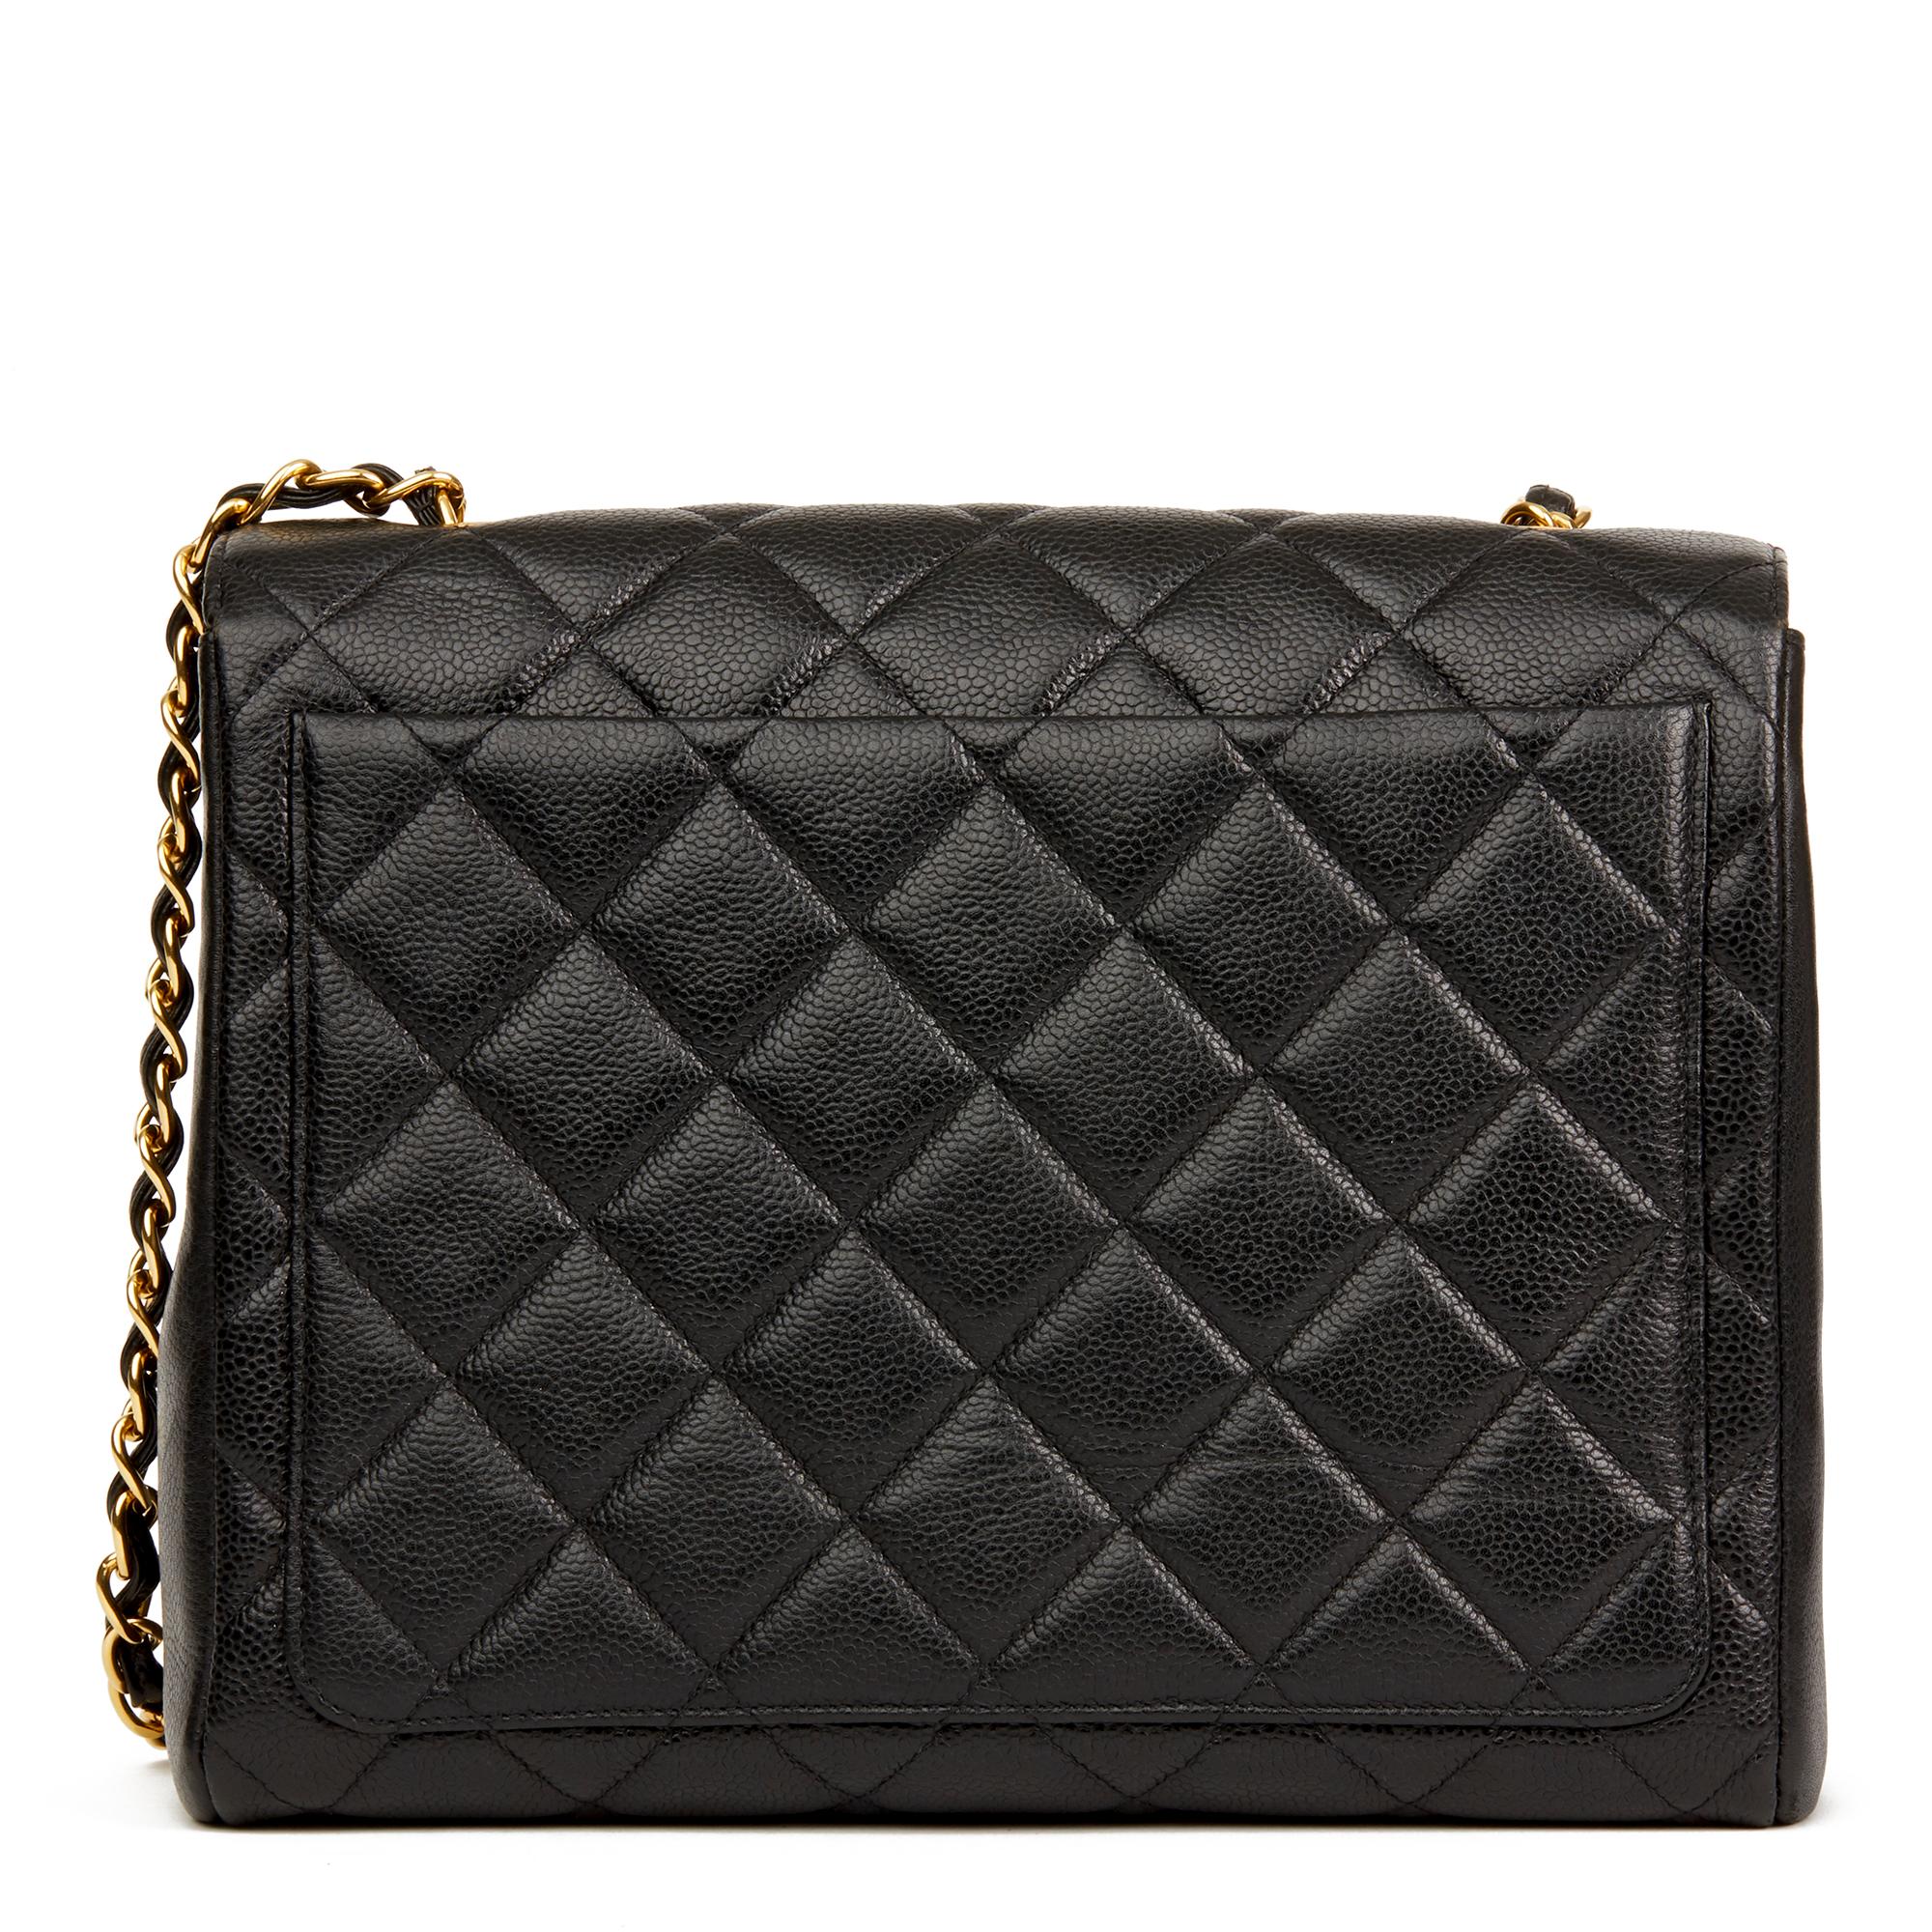 Women's 1995 Chanel Black Quilted Caviar Leather Vintage Classic Single Flap Bag